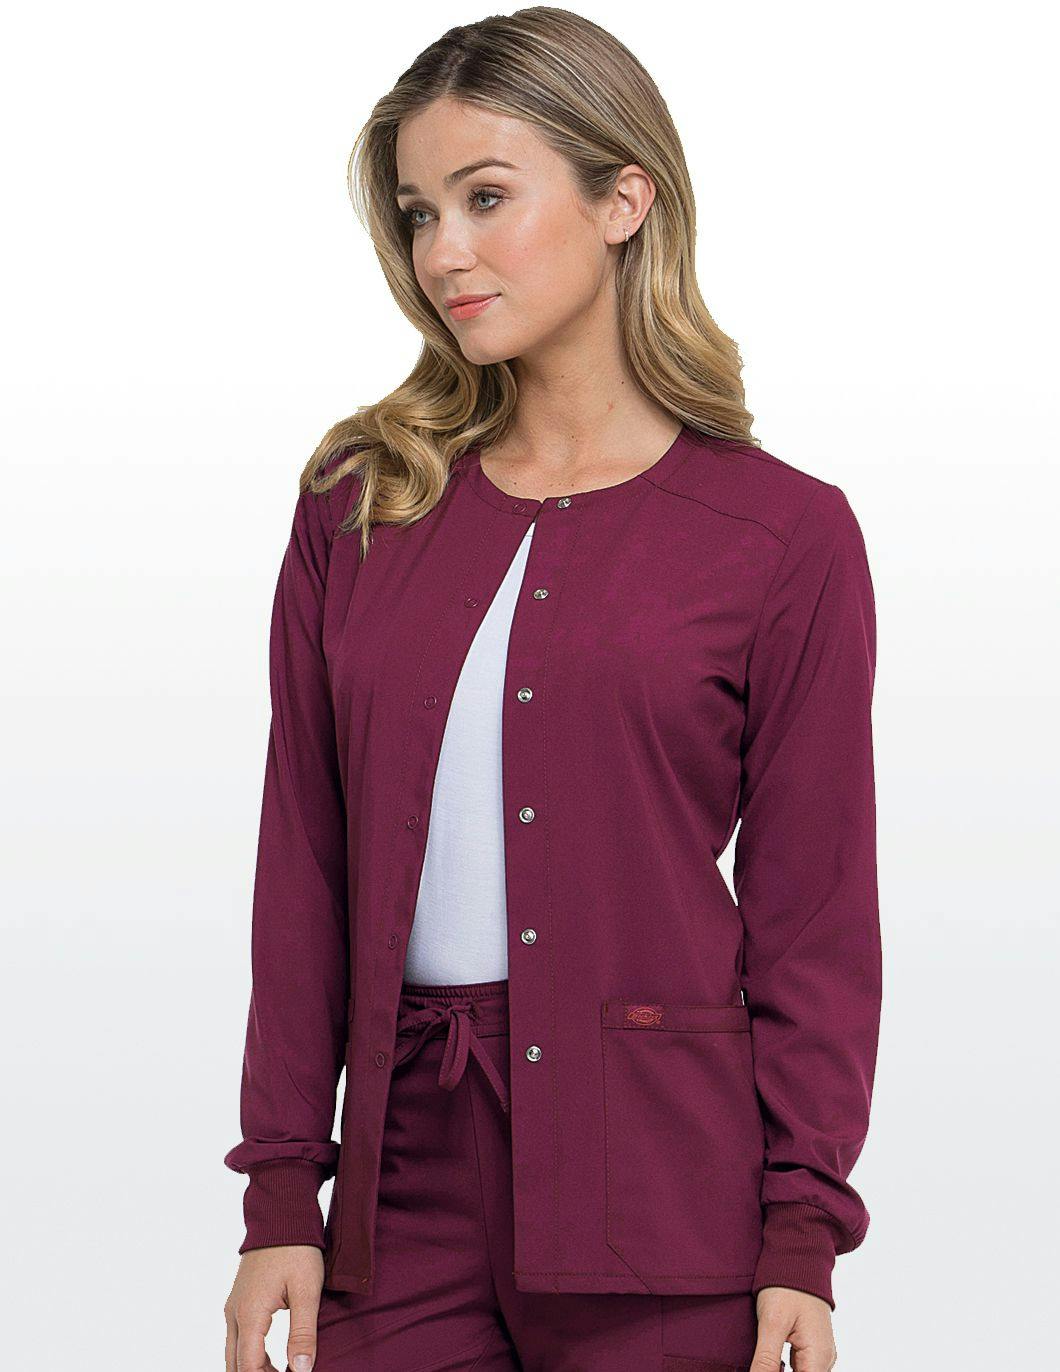 dickies-eds-essentials-womens-snap-front-scrub-warm-up-wine